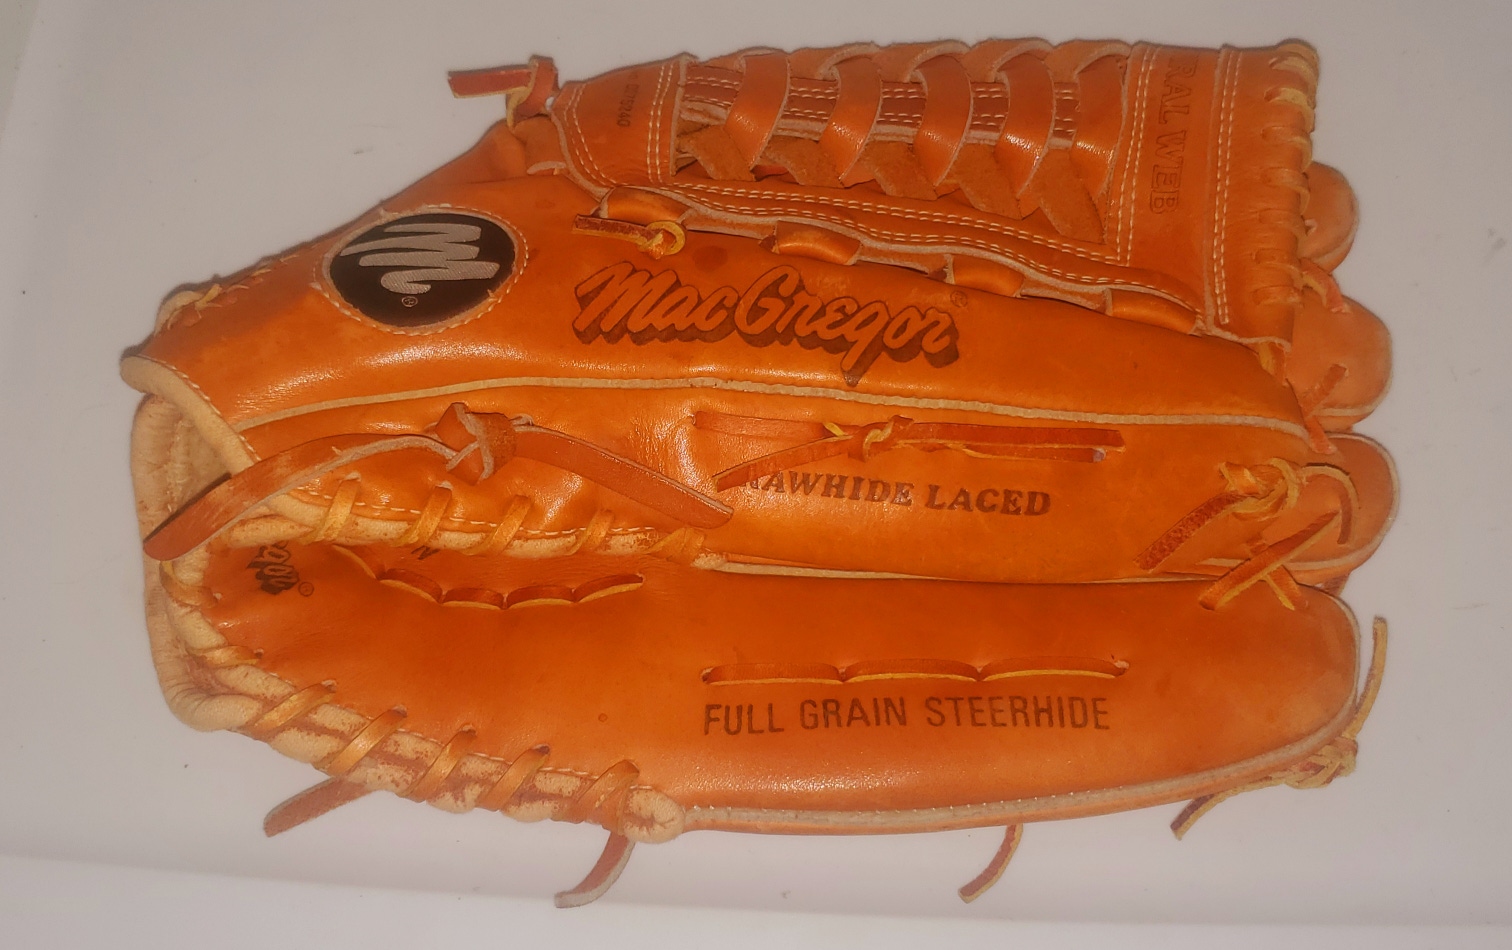 Macgregor 14" MG75 Used Right Hand Throw Outfield Baseball Glove 14"